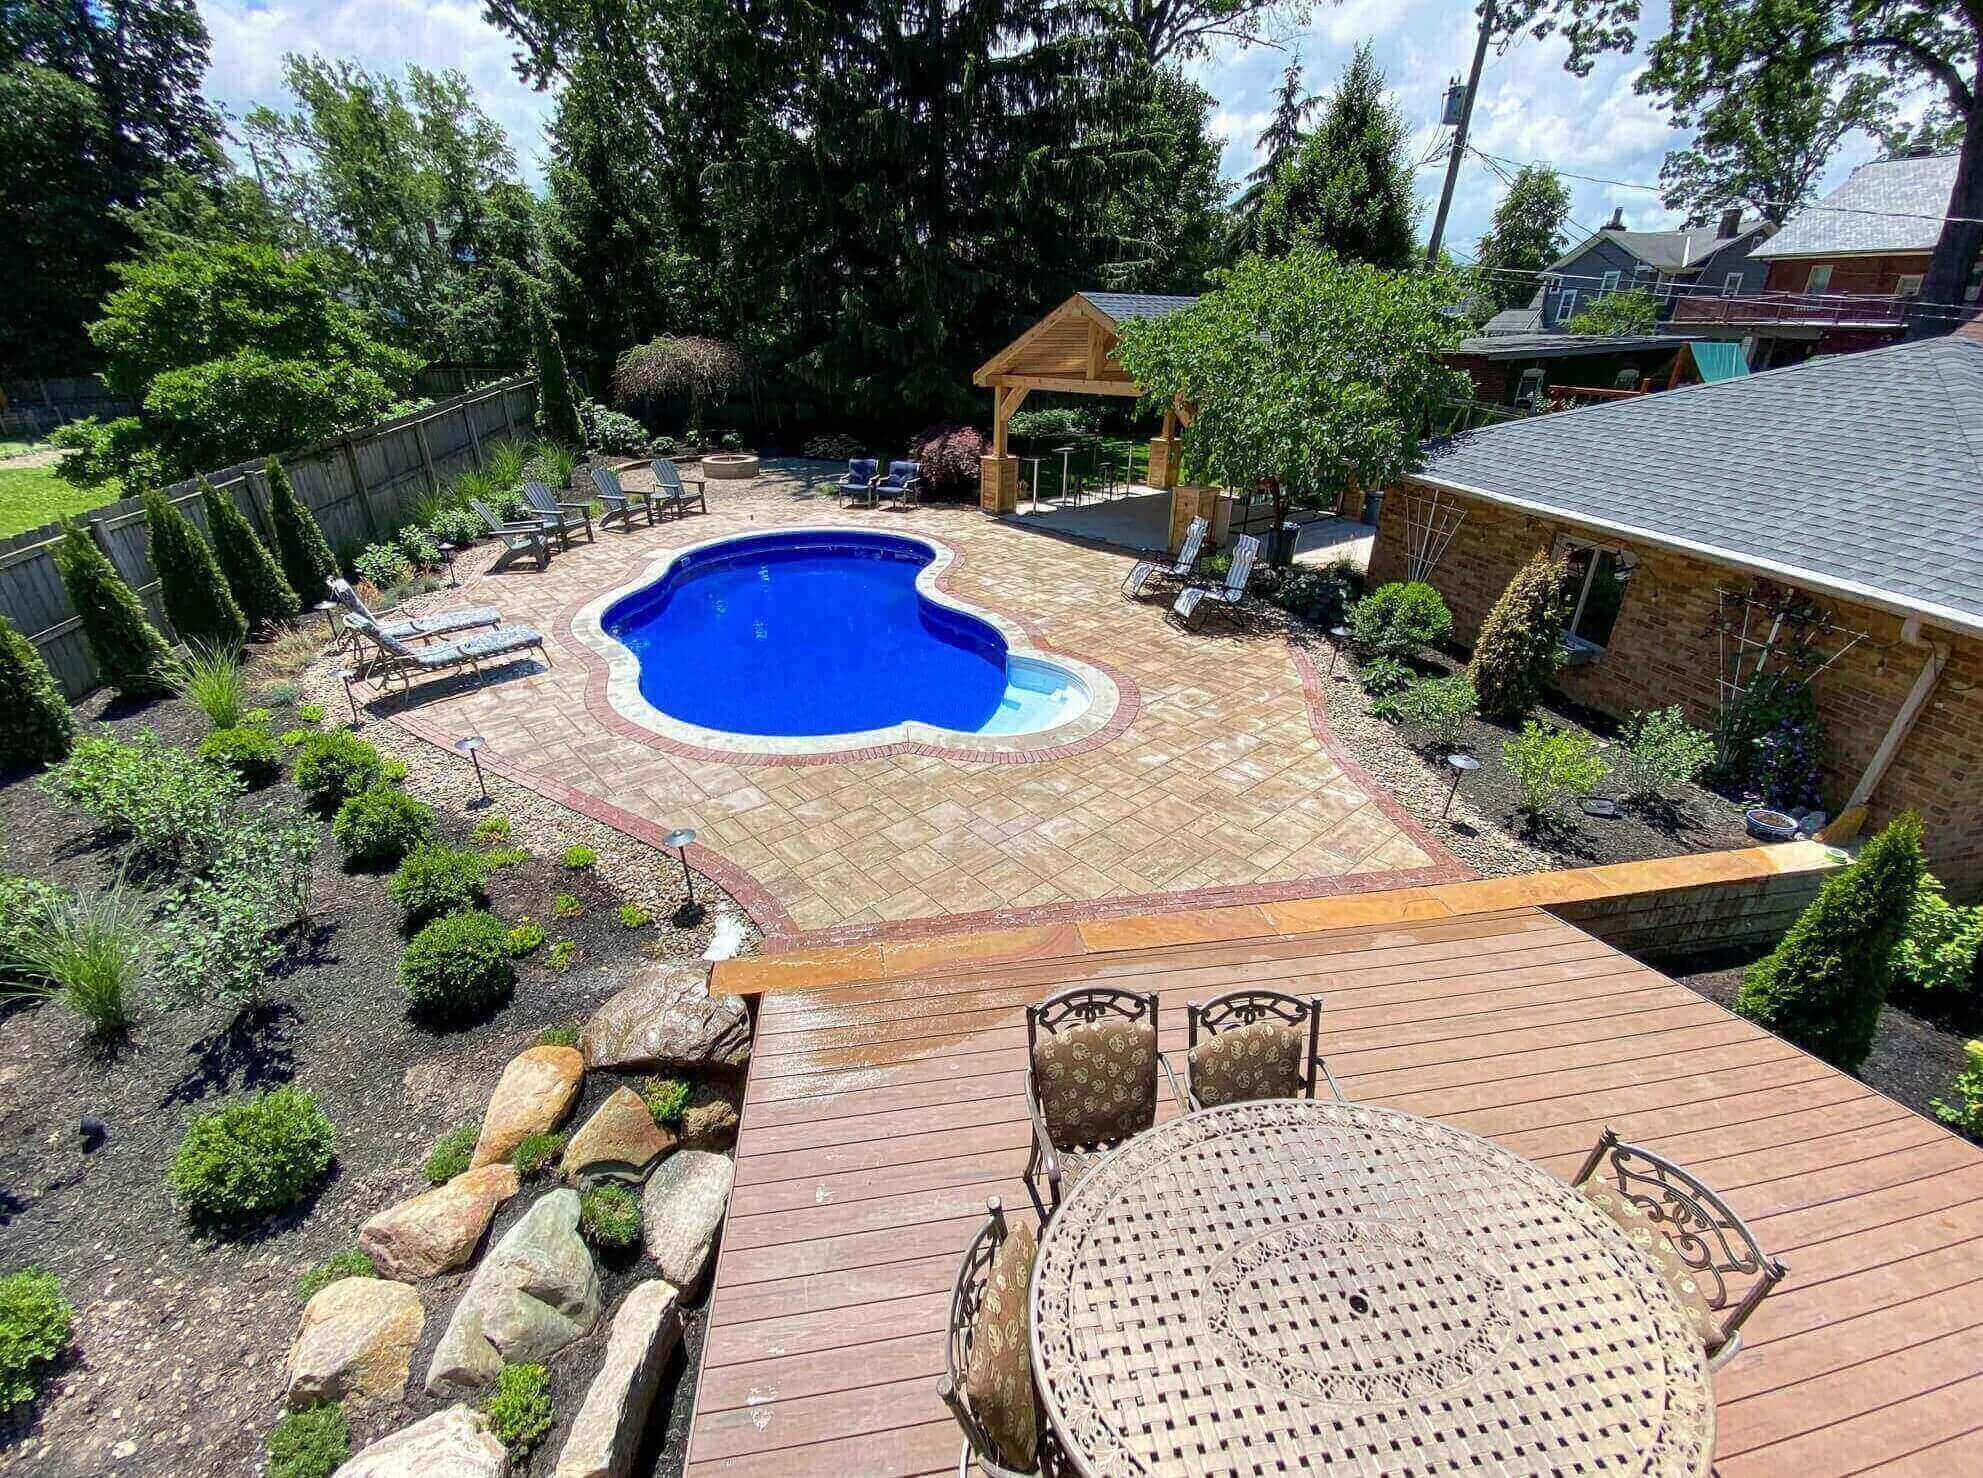 Complete backyard re-design and pool install